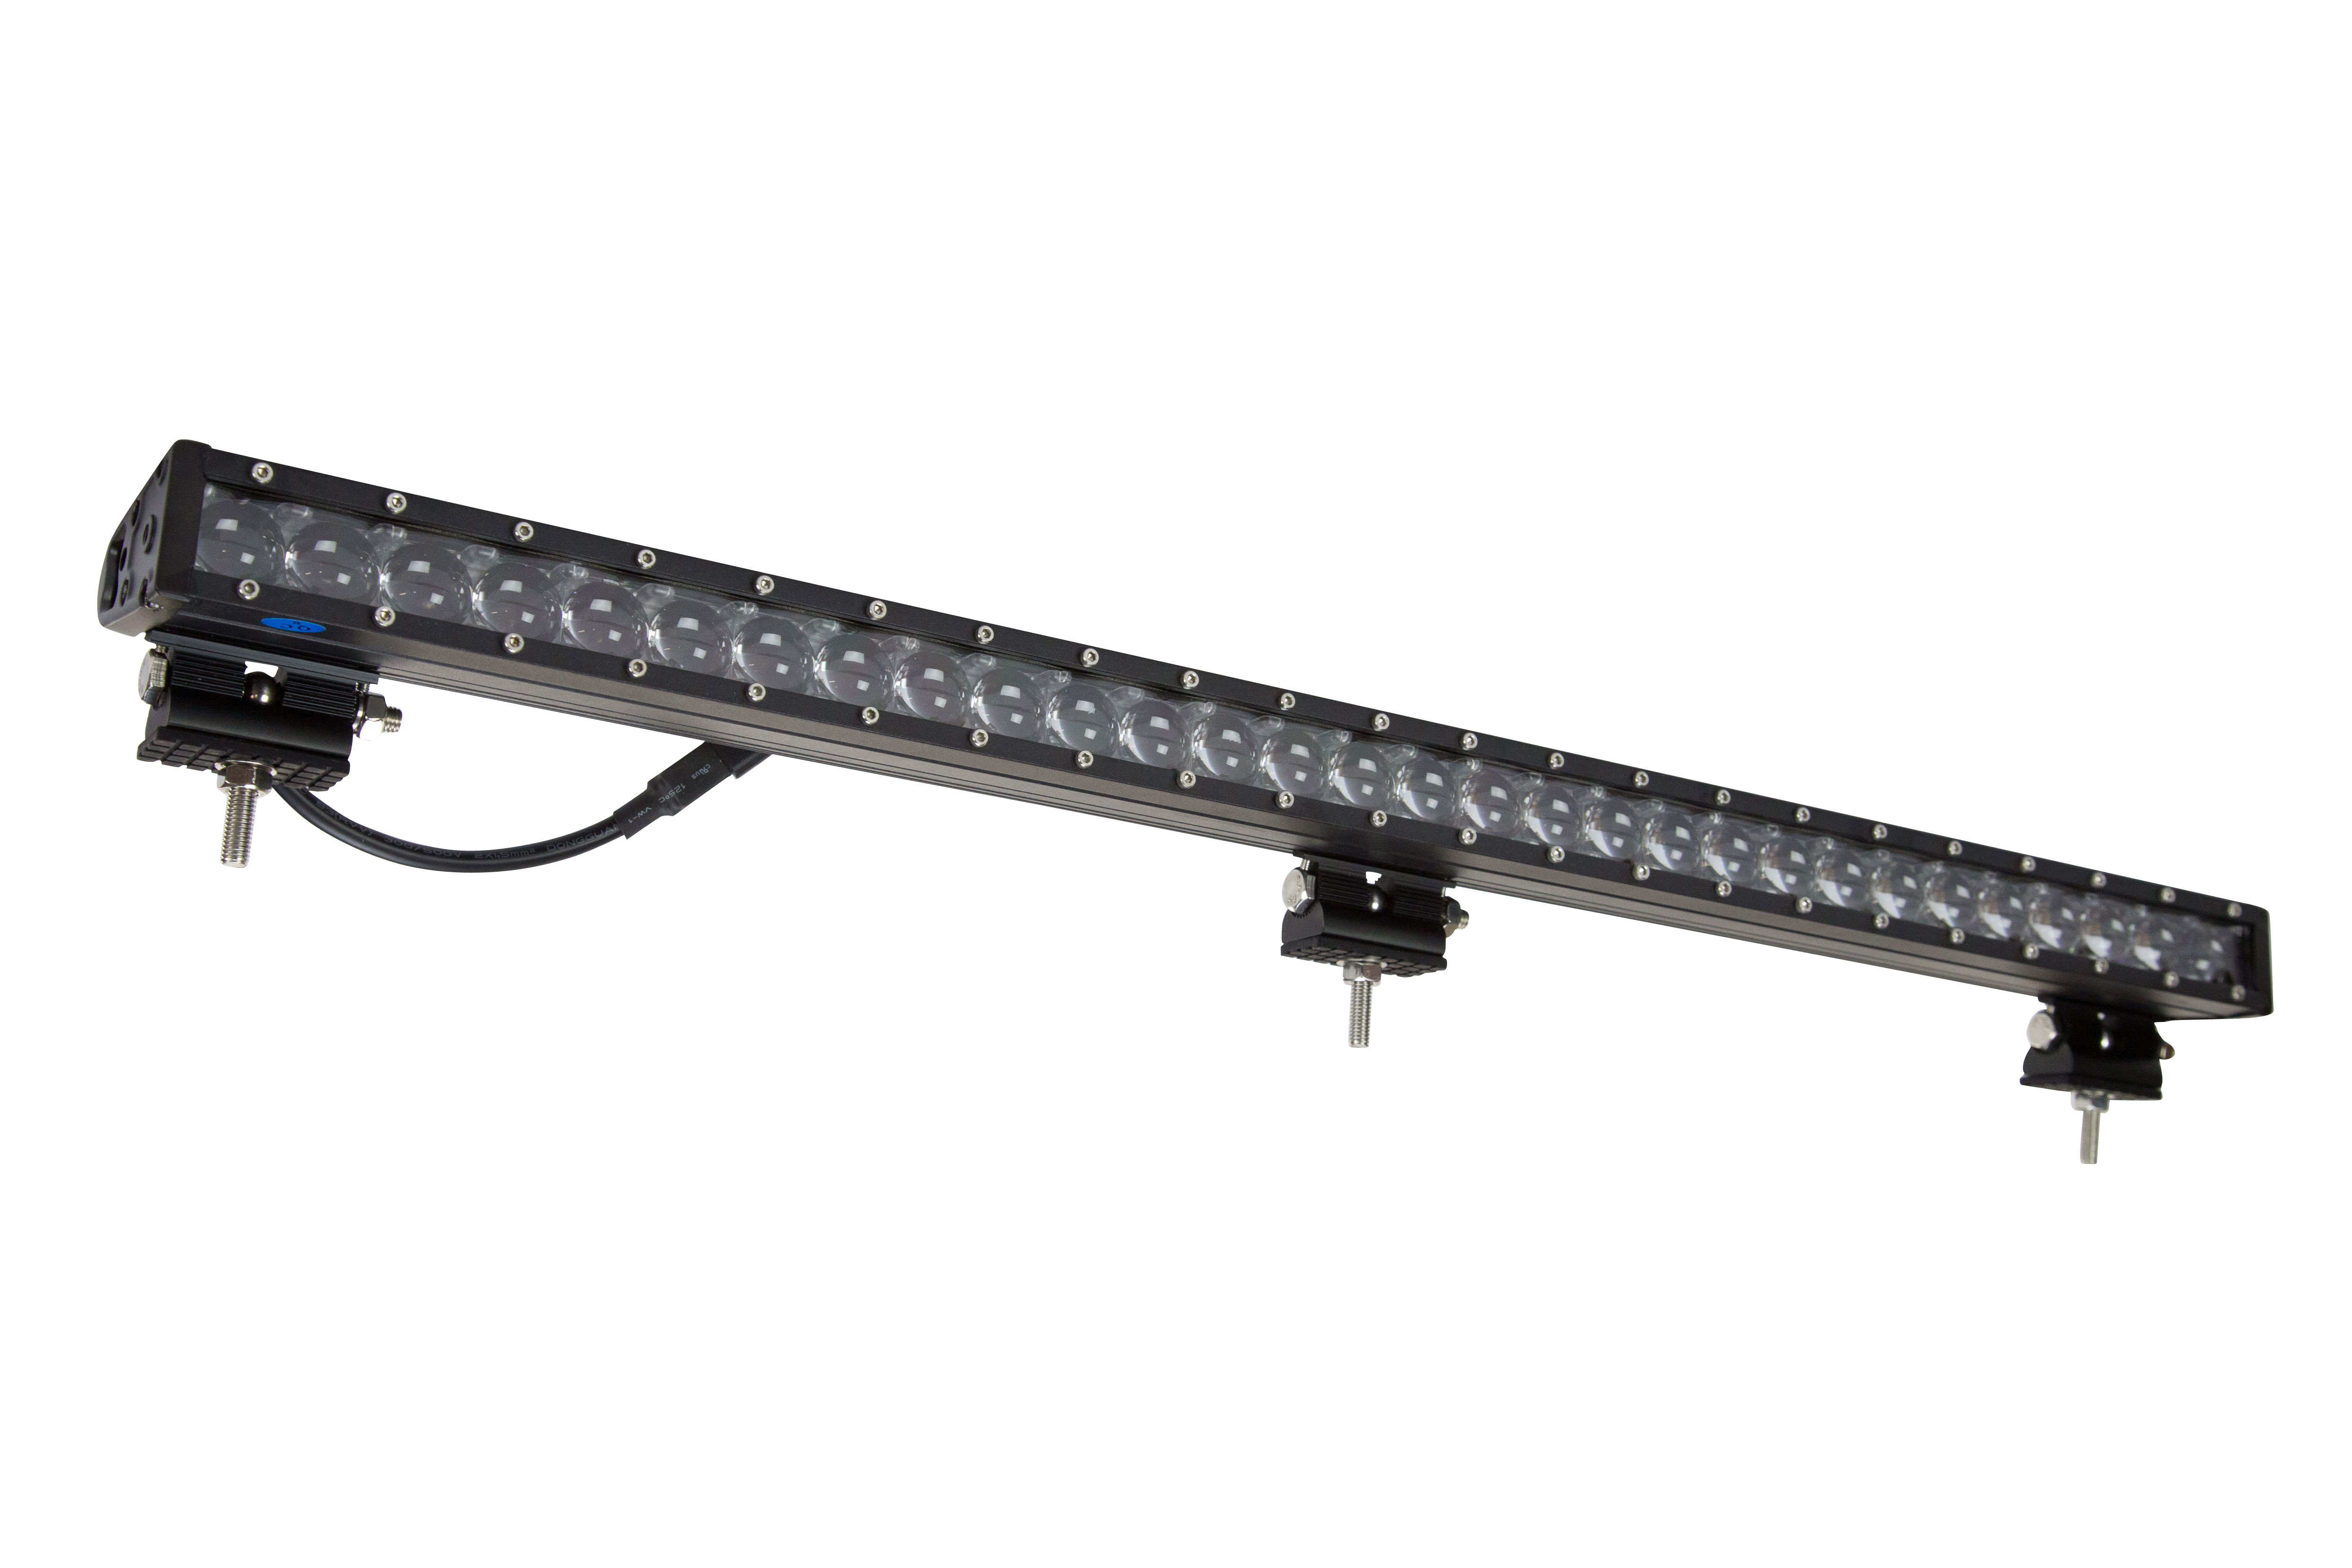 150 Watt LED Light Bar Constructed with 30 CREE LEDS